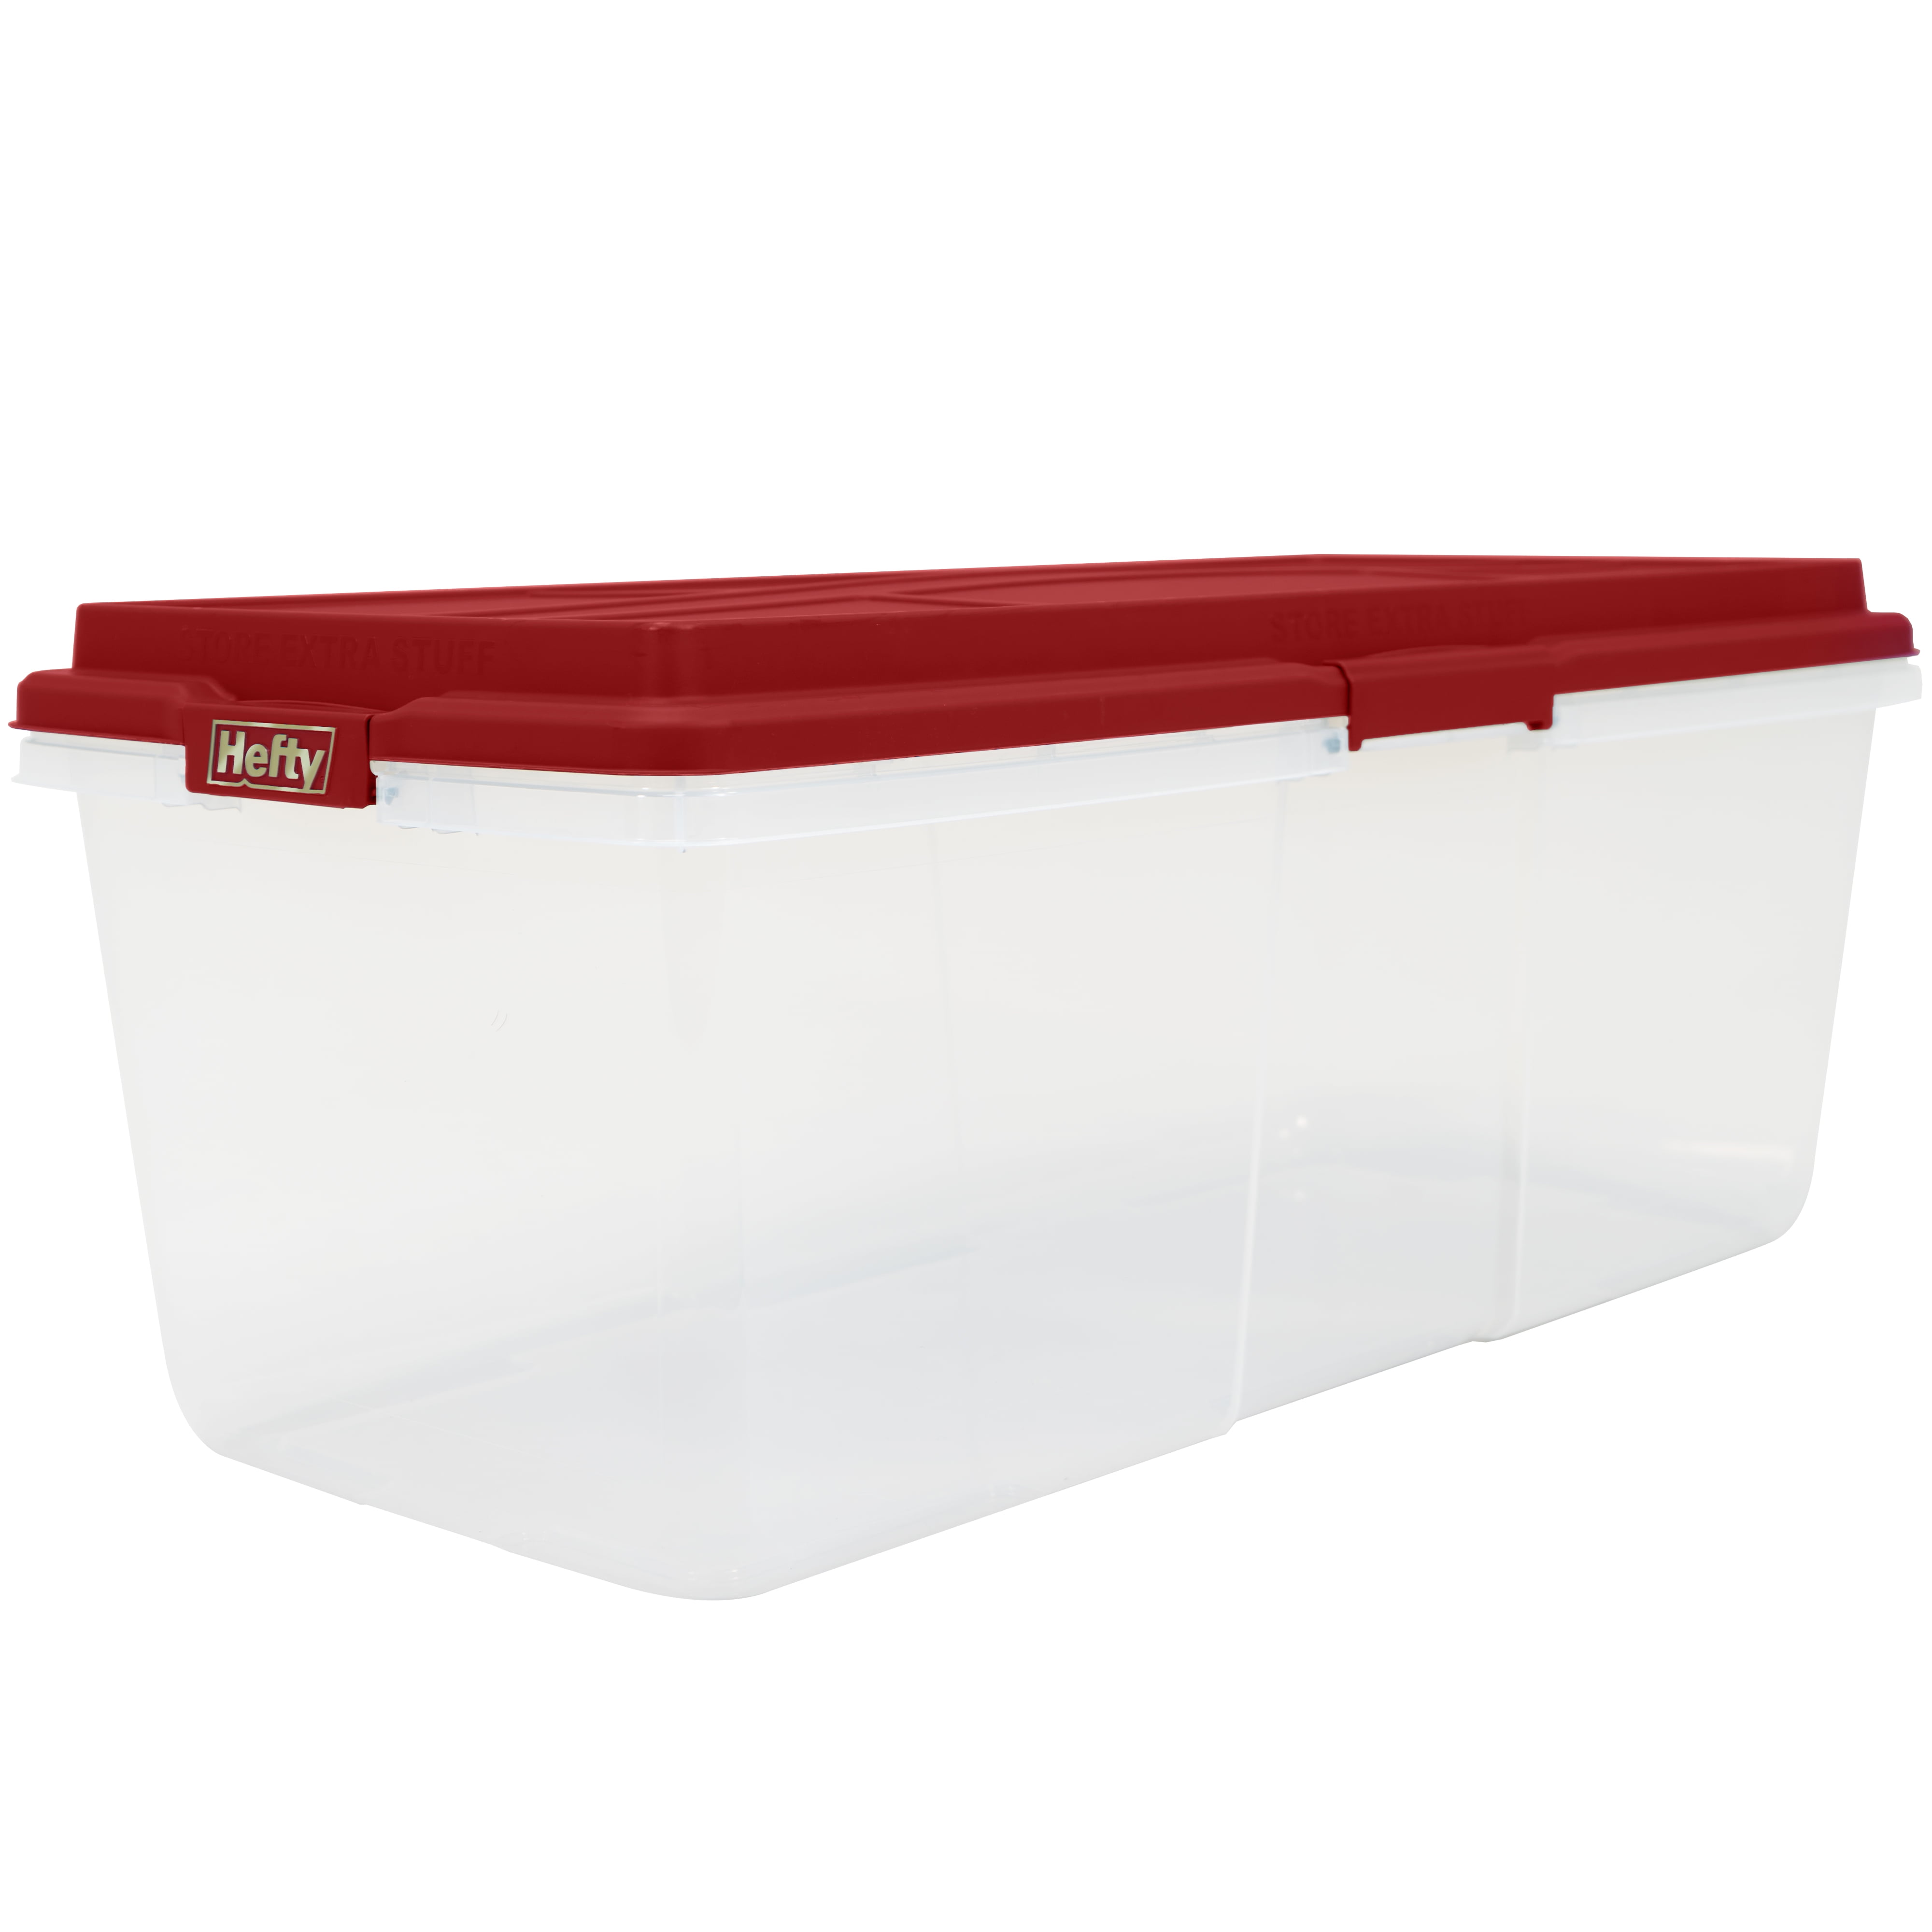 Hefty 113 qt Clear Plastic Holiday Latched Storage Bin, Red Lid